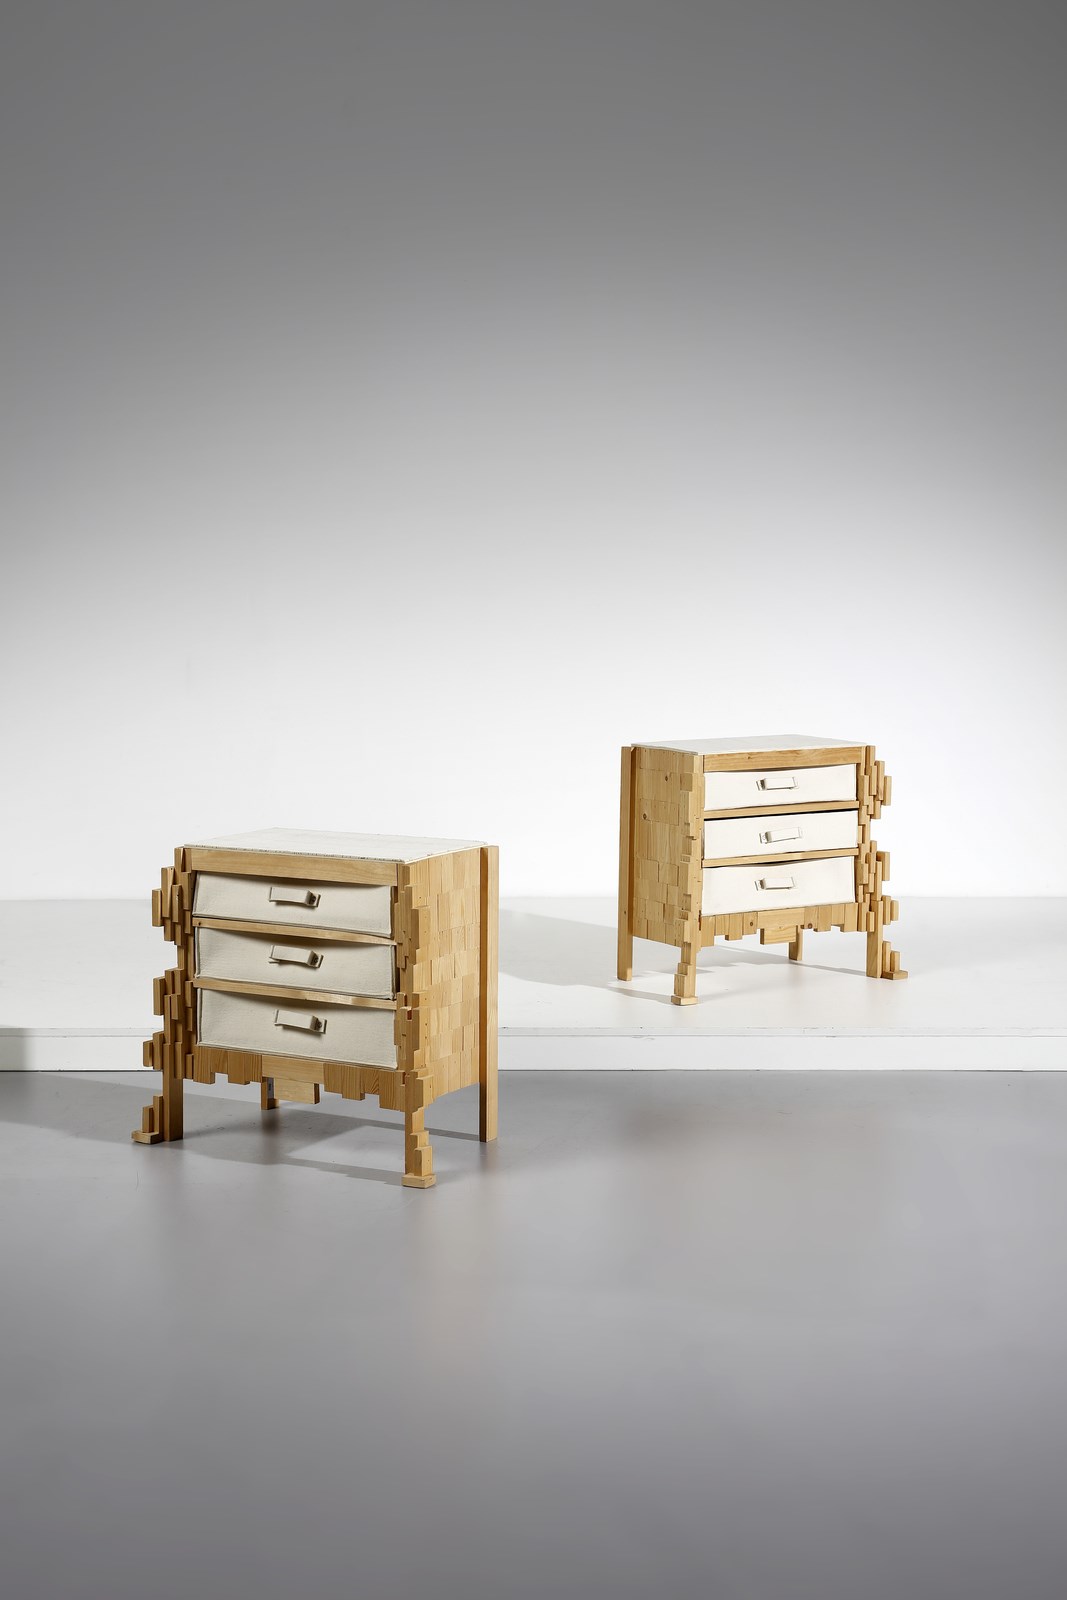 Pair of drawers Pixelisee, Witness flat collection (Jurgen Bey)